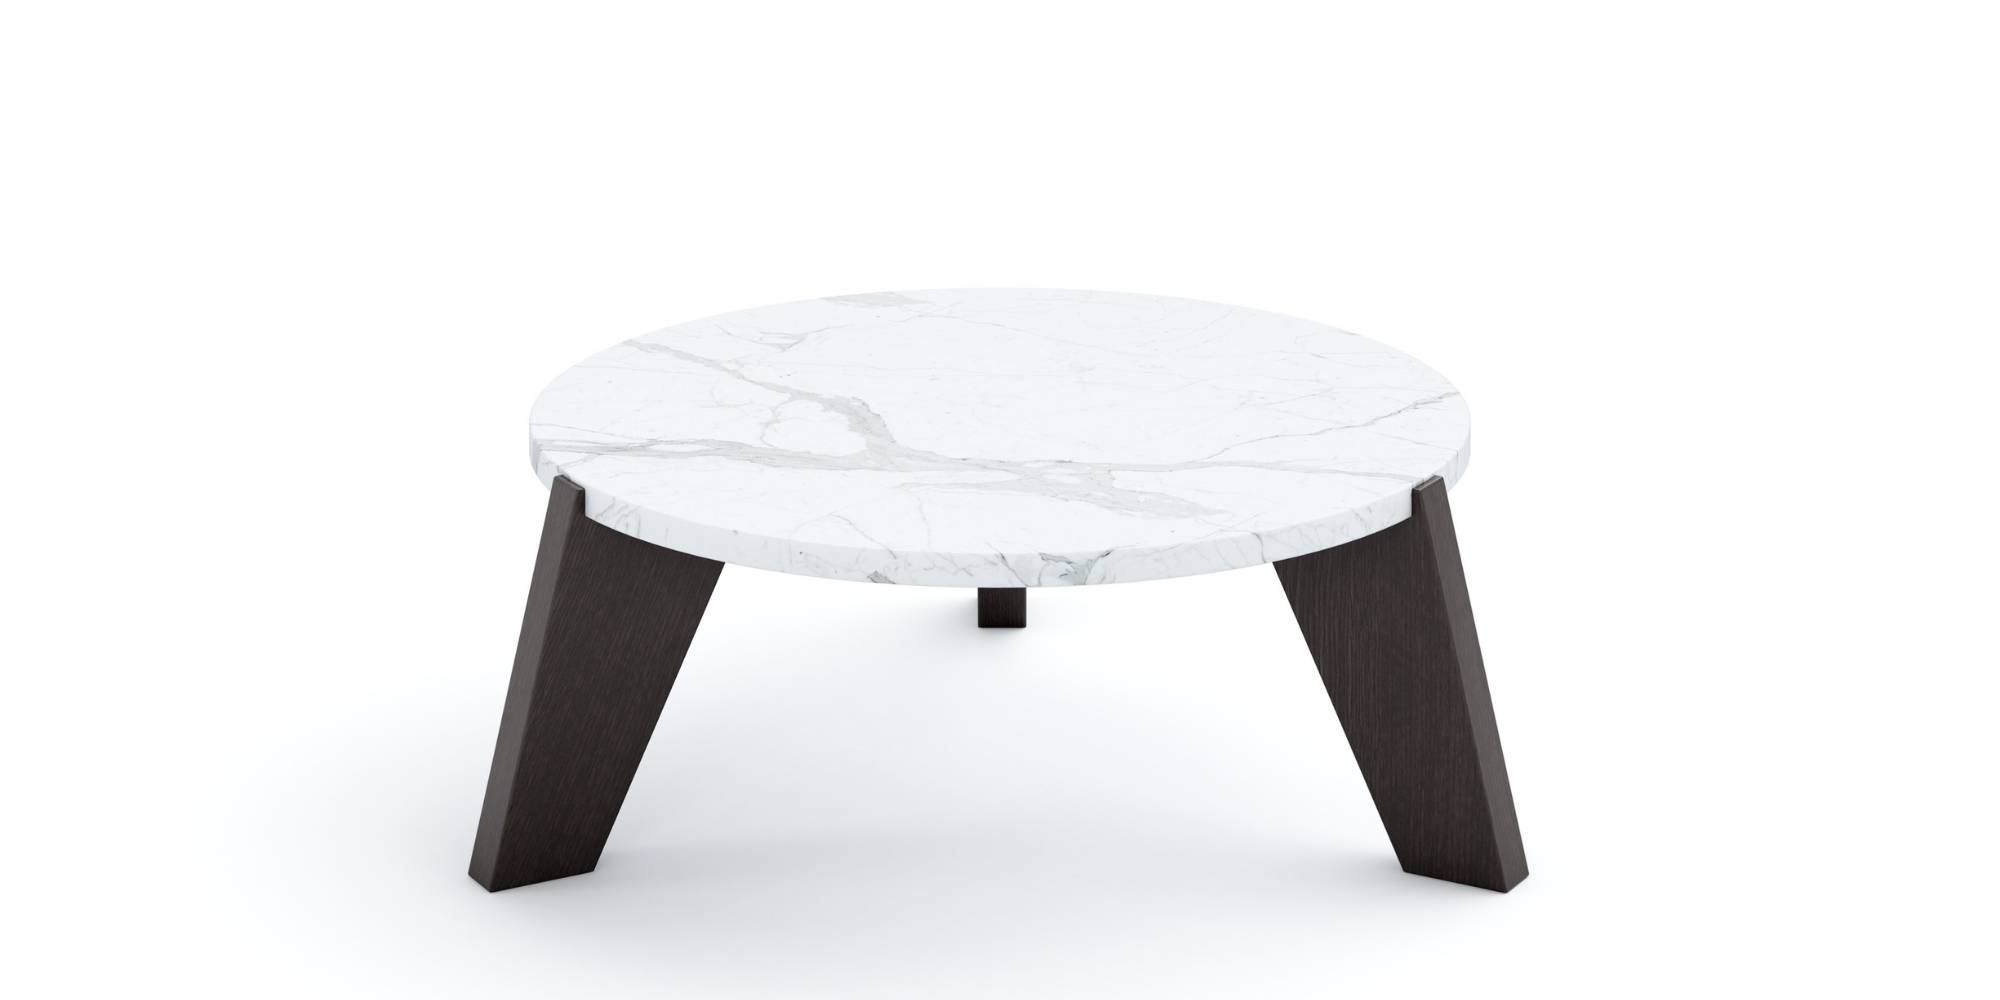 Aquila Coffee Table 40 – Small in Outdoor Tables Coffee Tables for Asteri collection